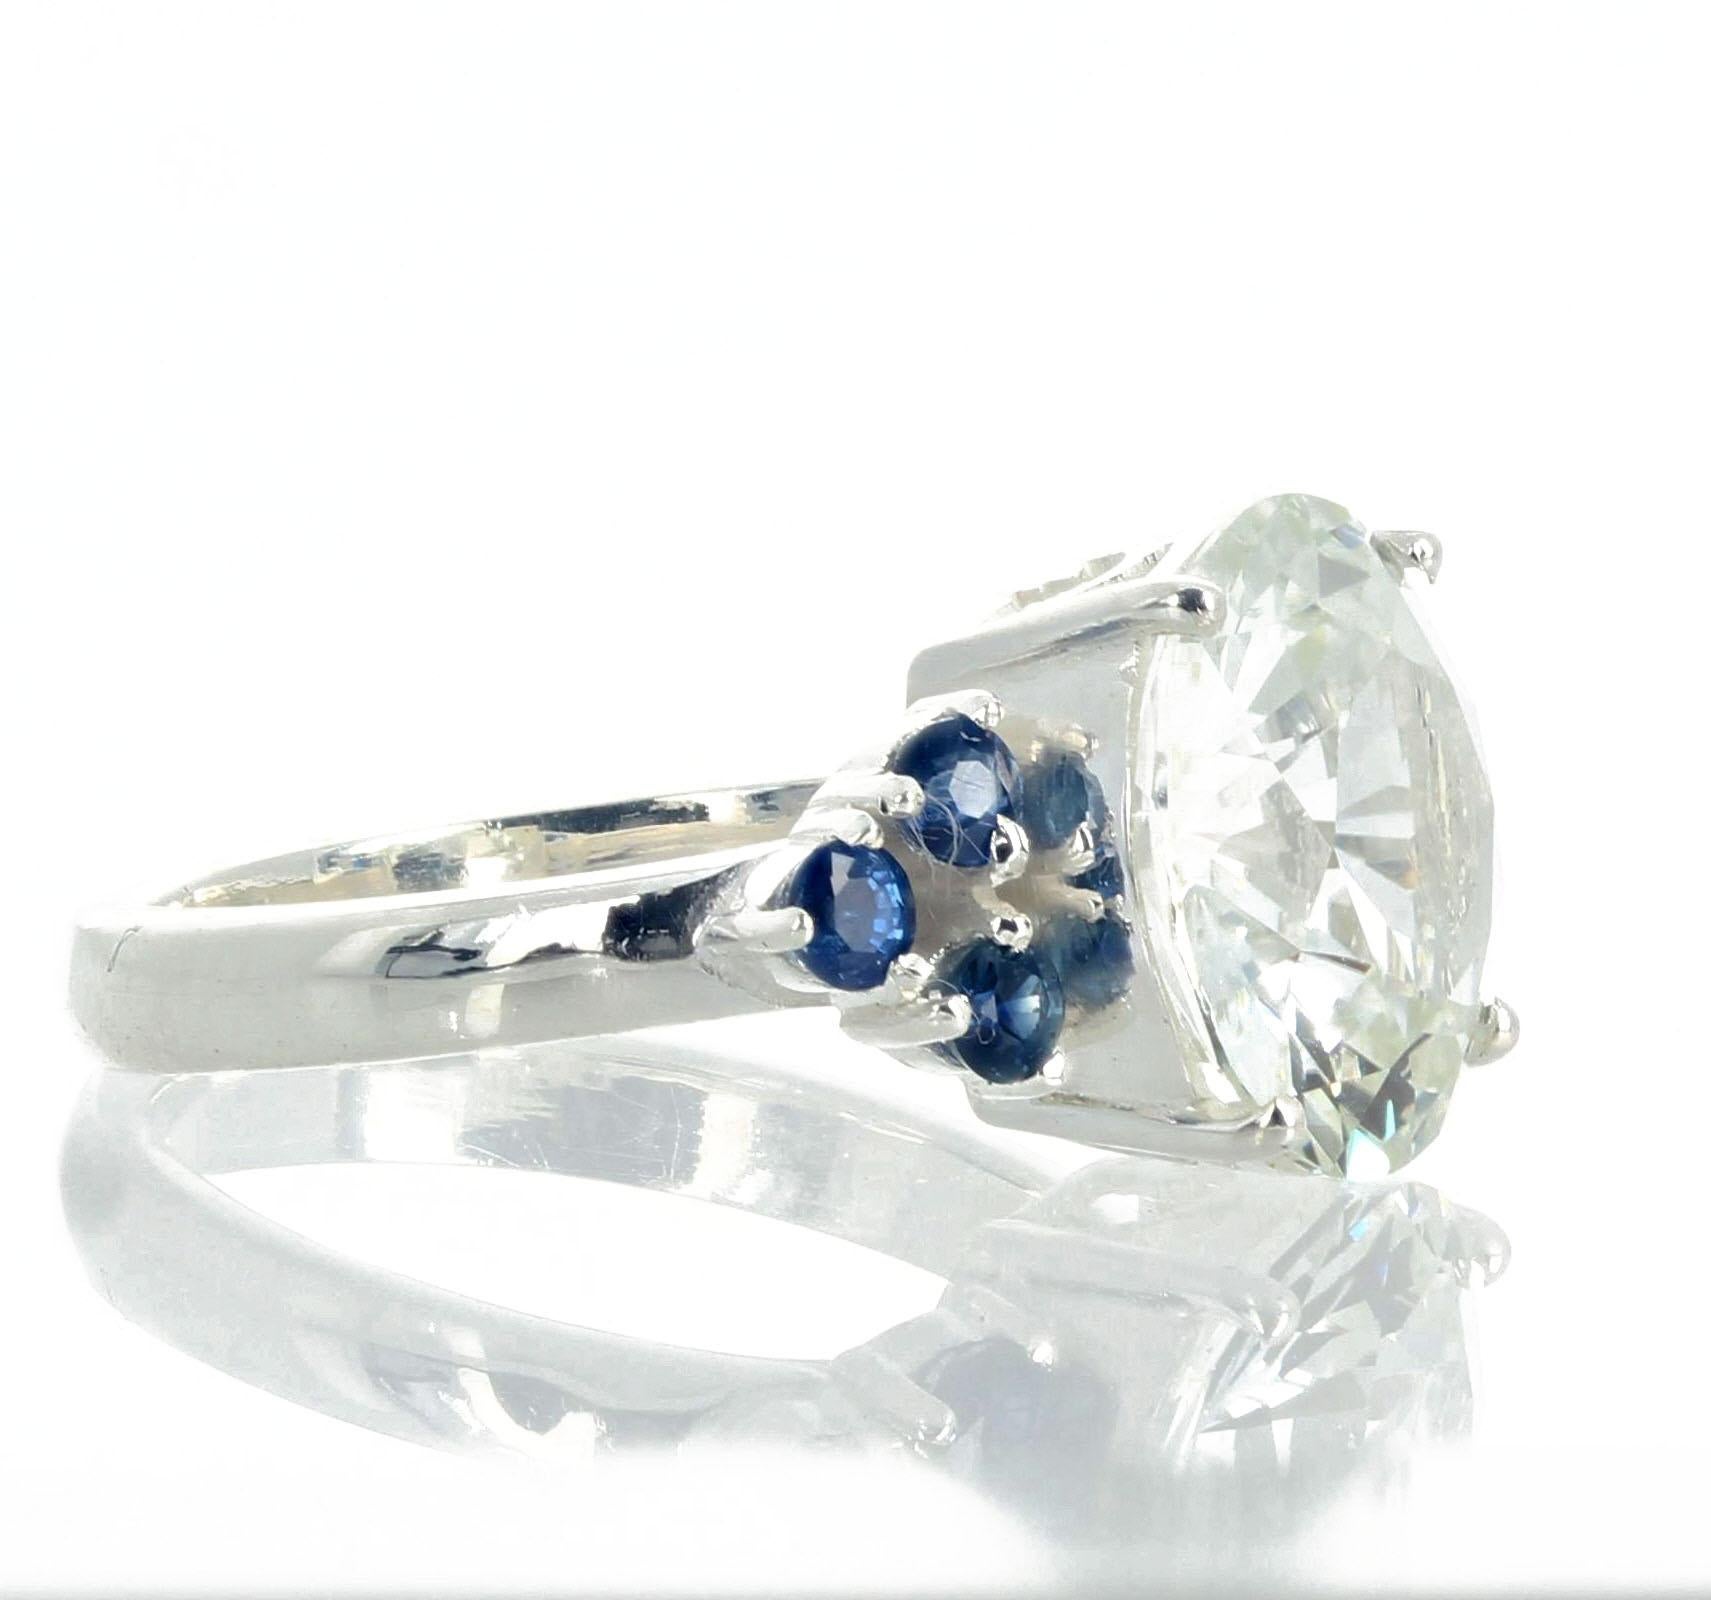 AJD Glittering 6.52 Carat Natural Fiery White Zircon & Blue Sapphires Ring For Sale 3